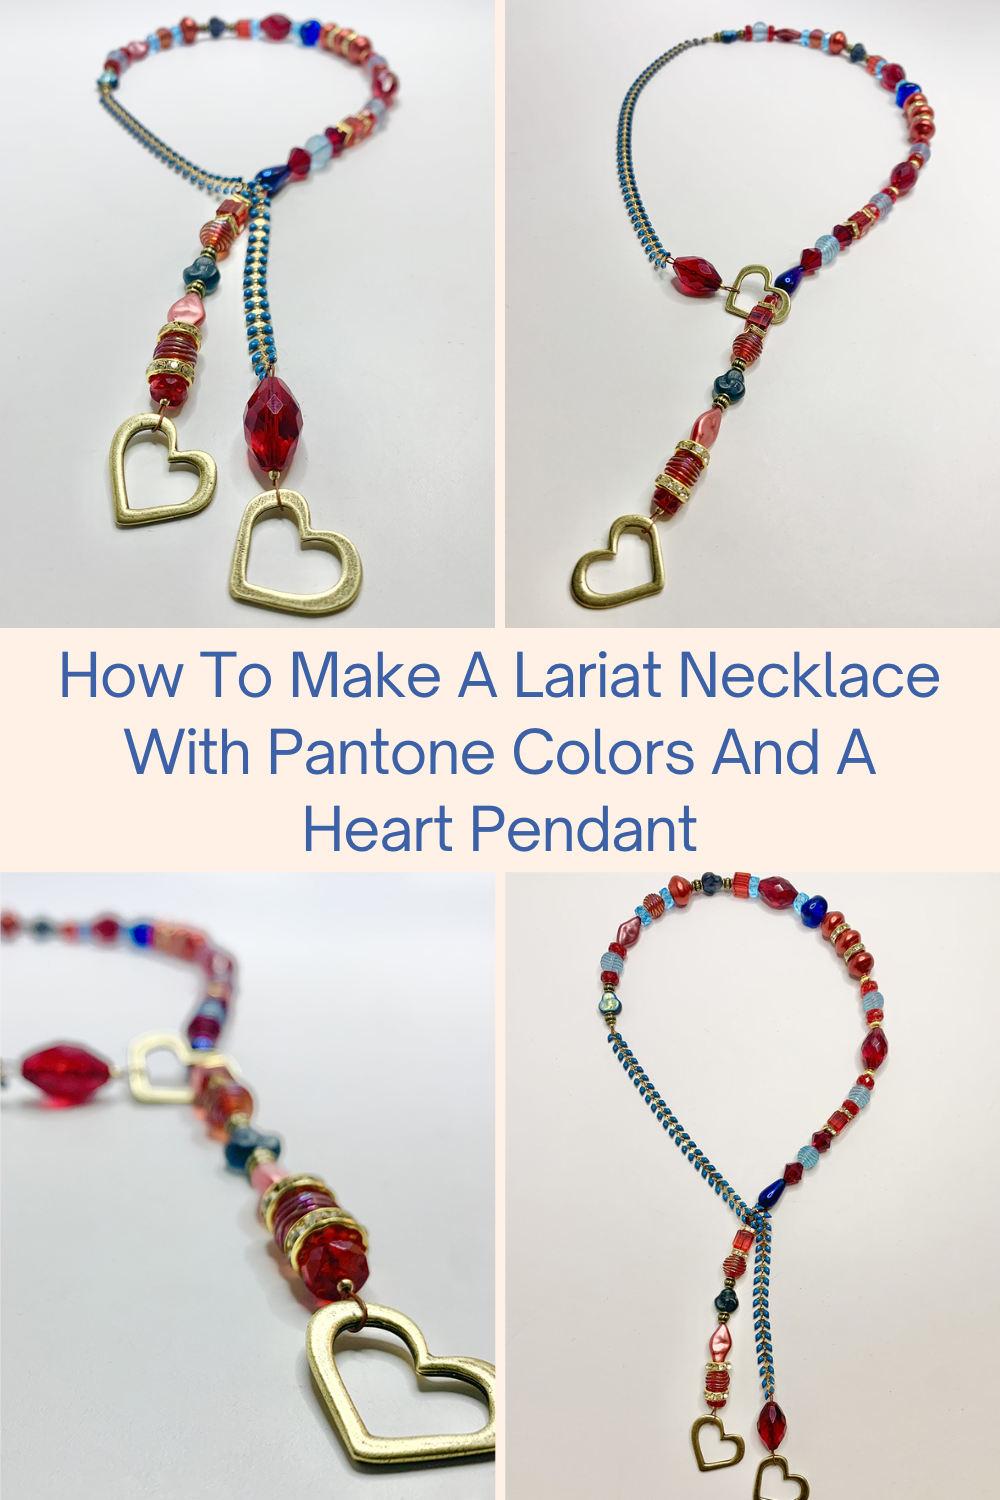 How To Make A Lariat Necklace With Pantone Colors And A Heart Pendant Collage